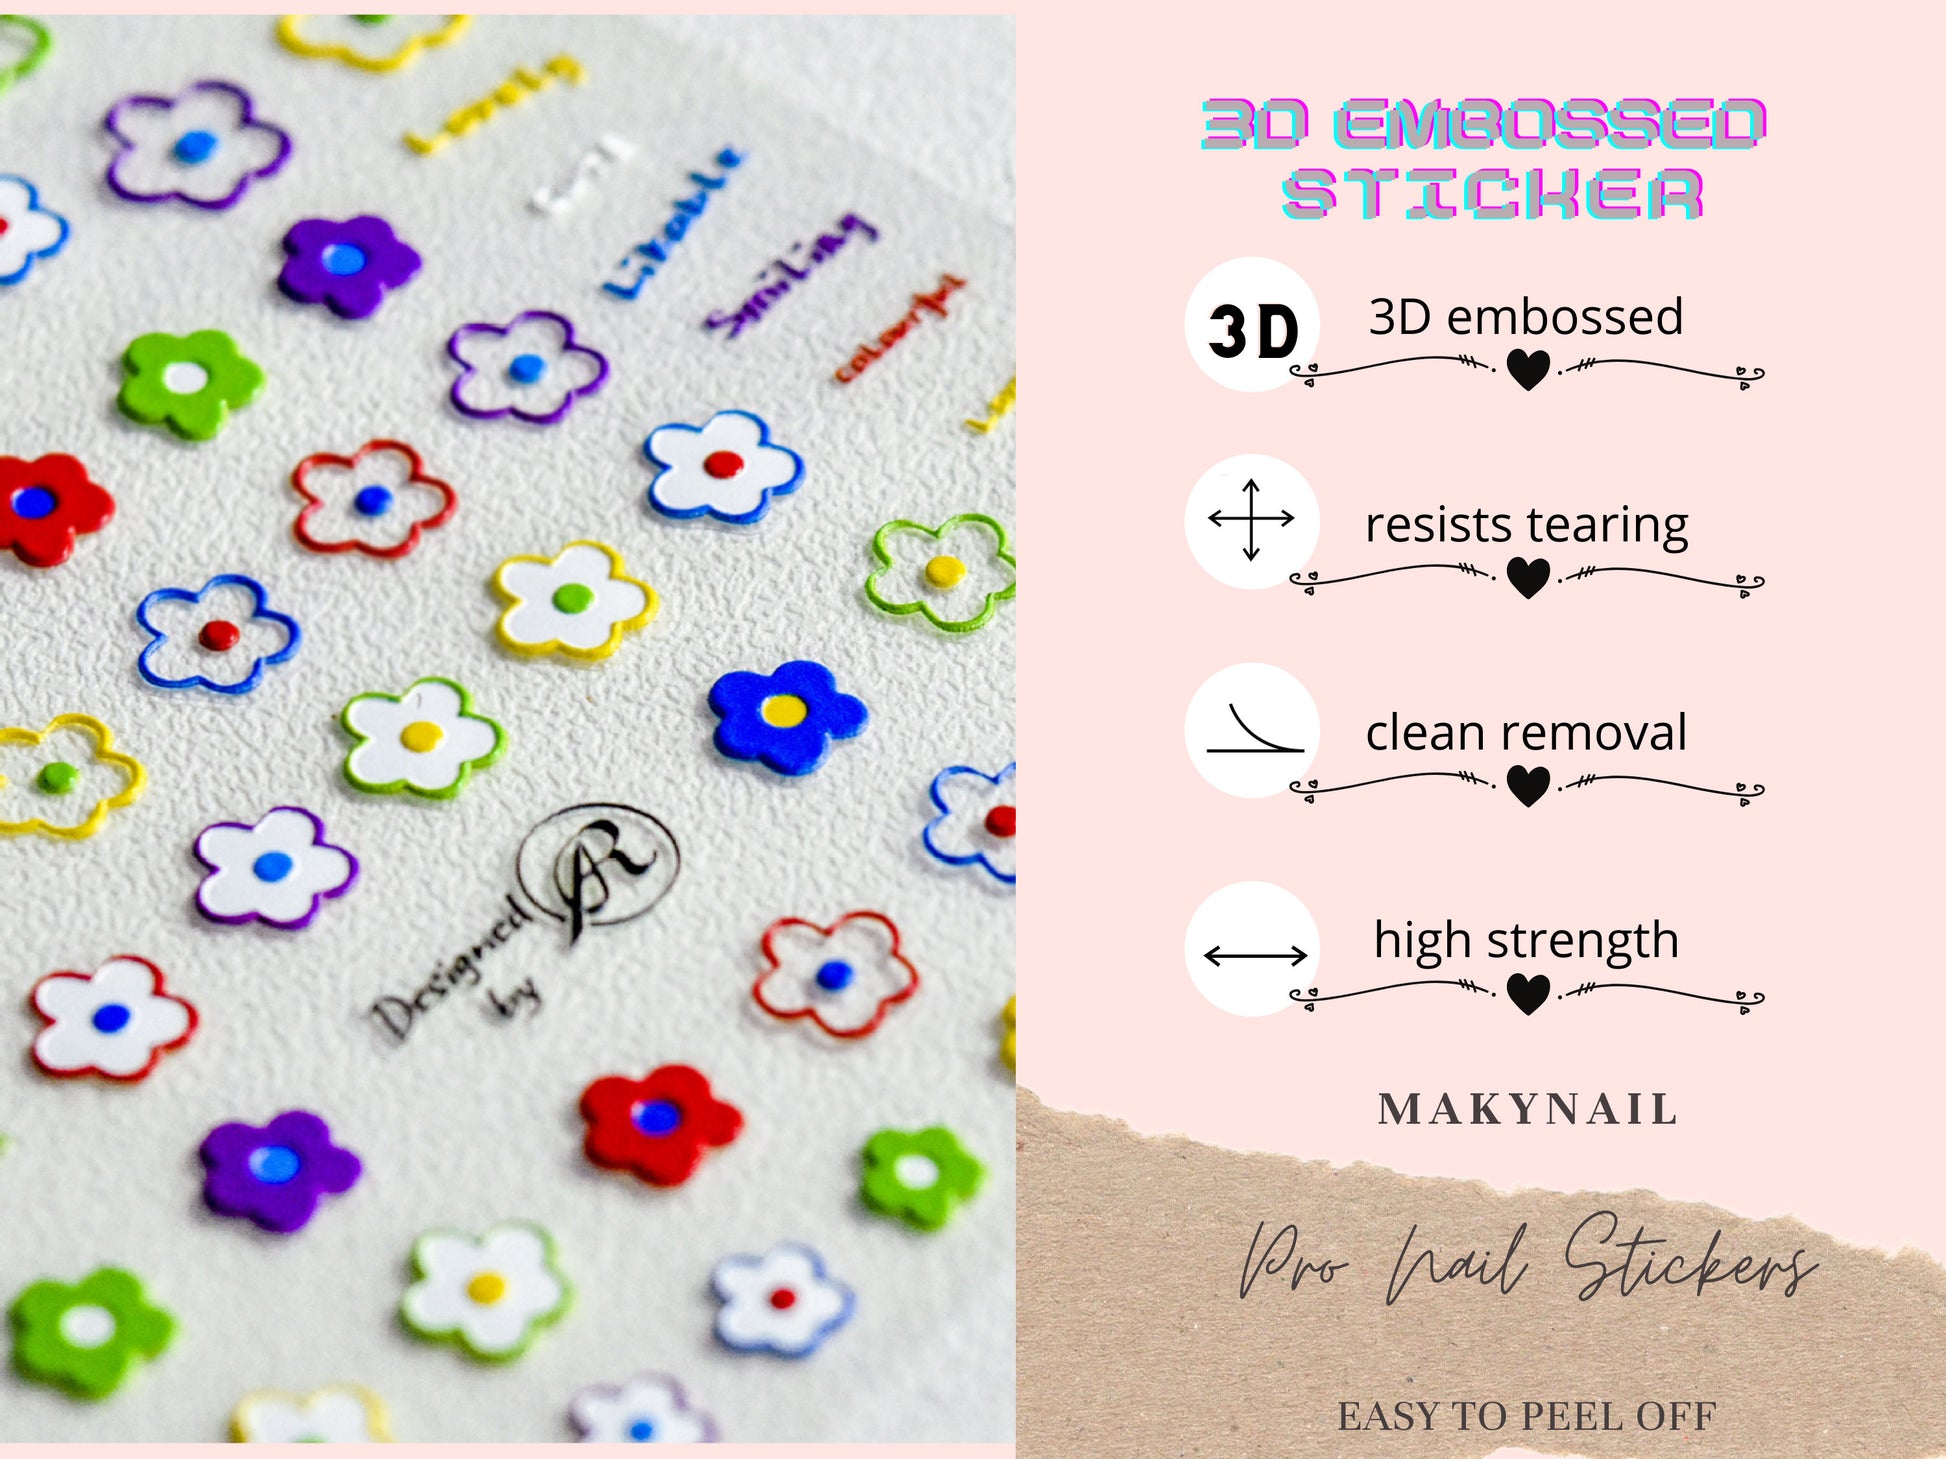 Chibi Fruit Smile Face Nail Art Sticker/ Smiley Happy Rainbow DIY Tips Stickers/ Doodle 3D embossed stickers/ Cute Lovely flower nail art